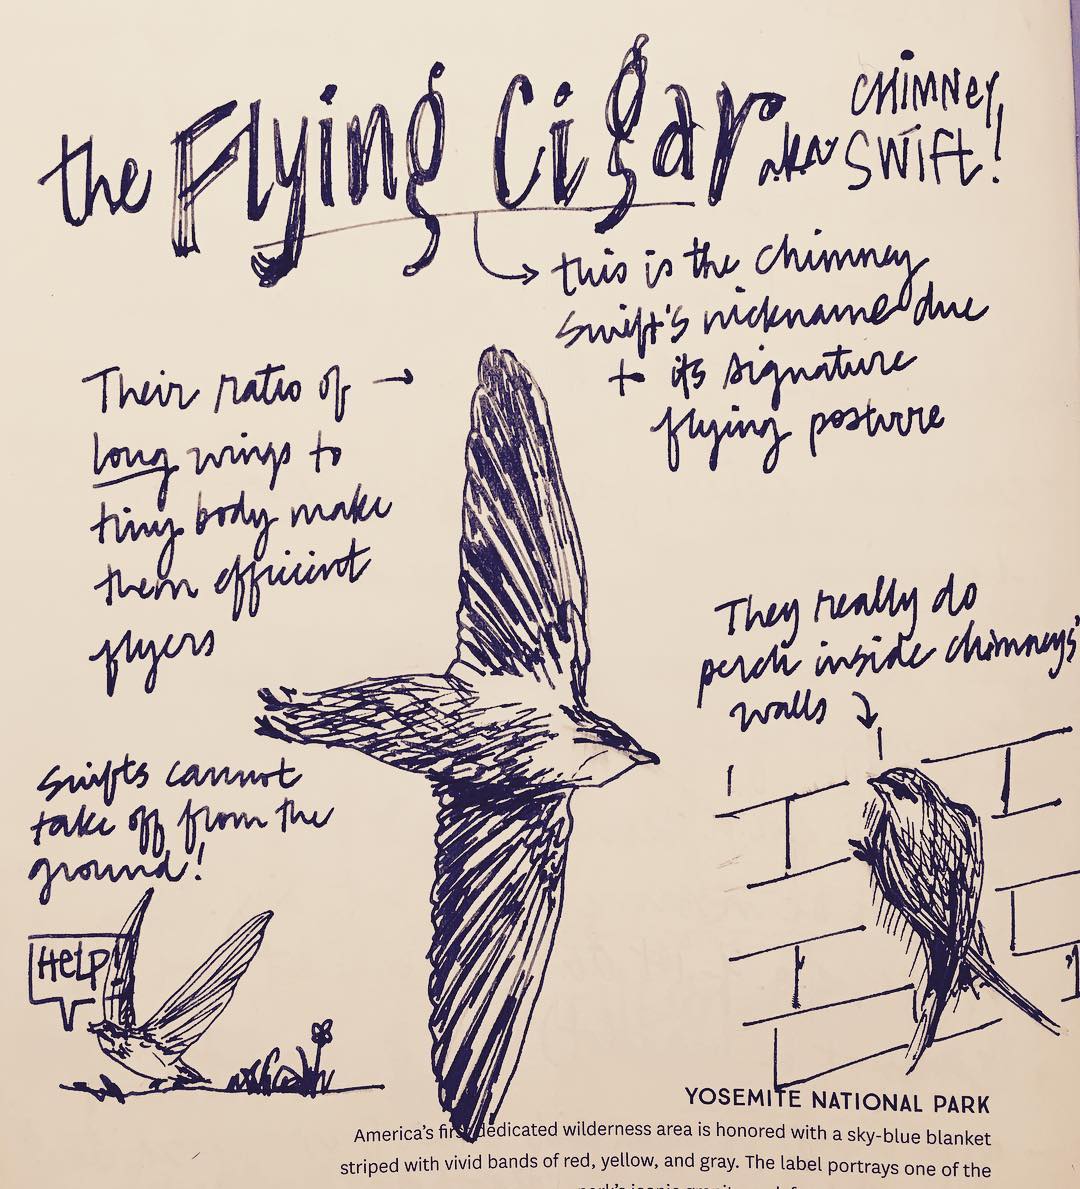 A sketch of a few chimney swifts: one in the center flying with wings extended.